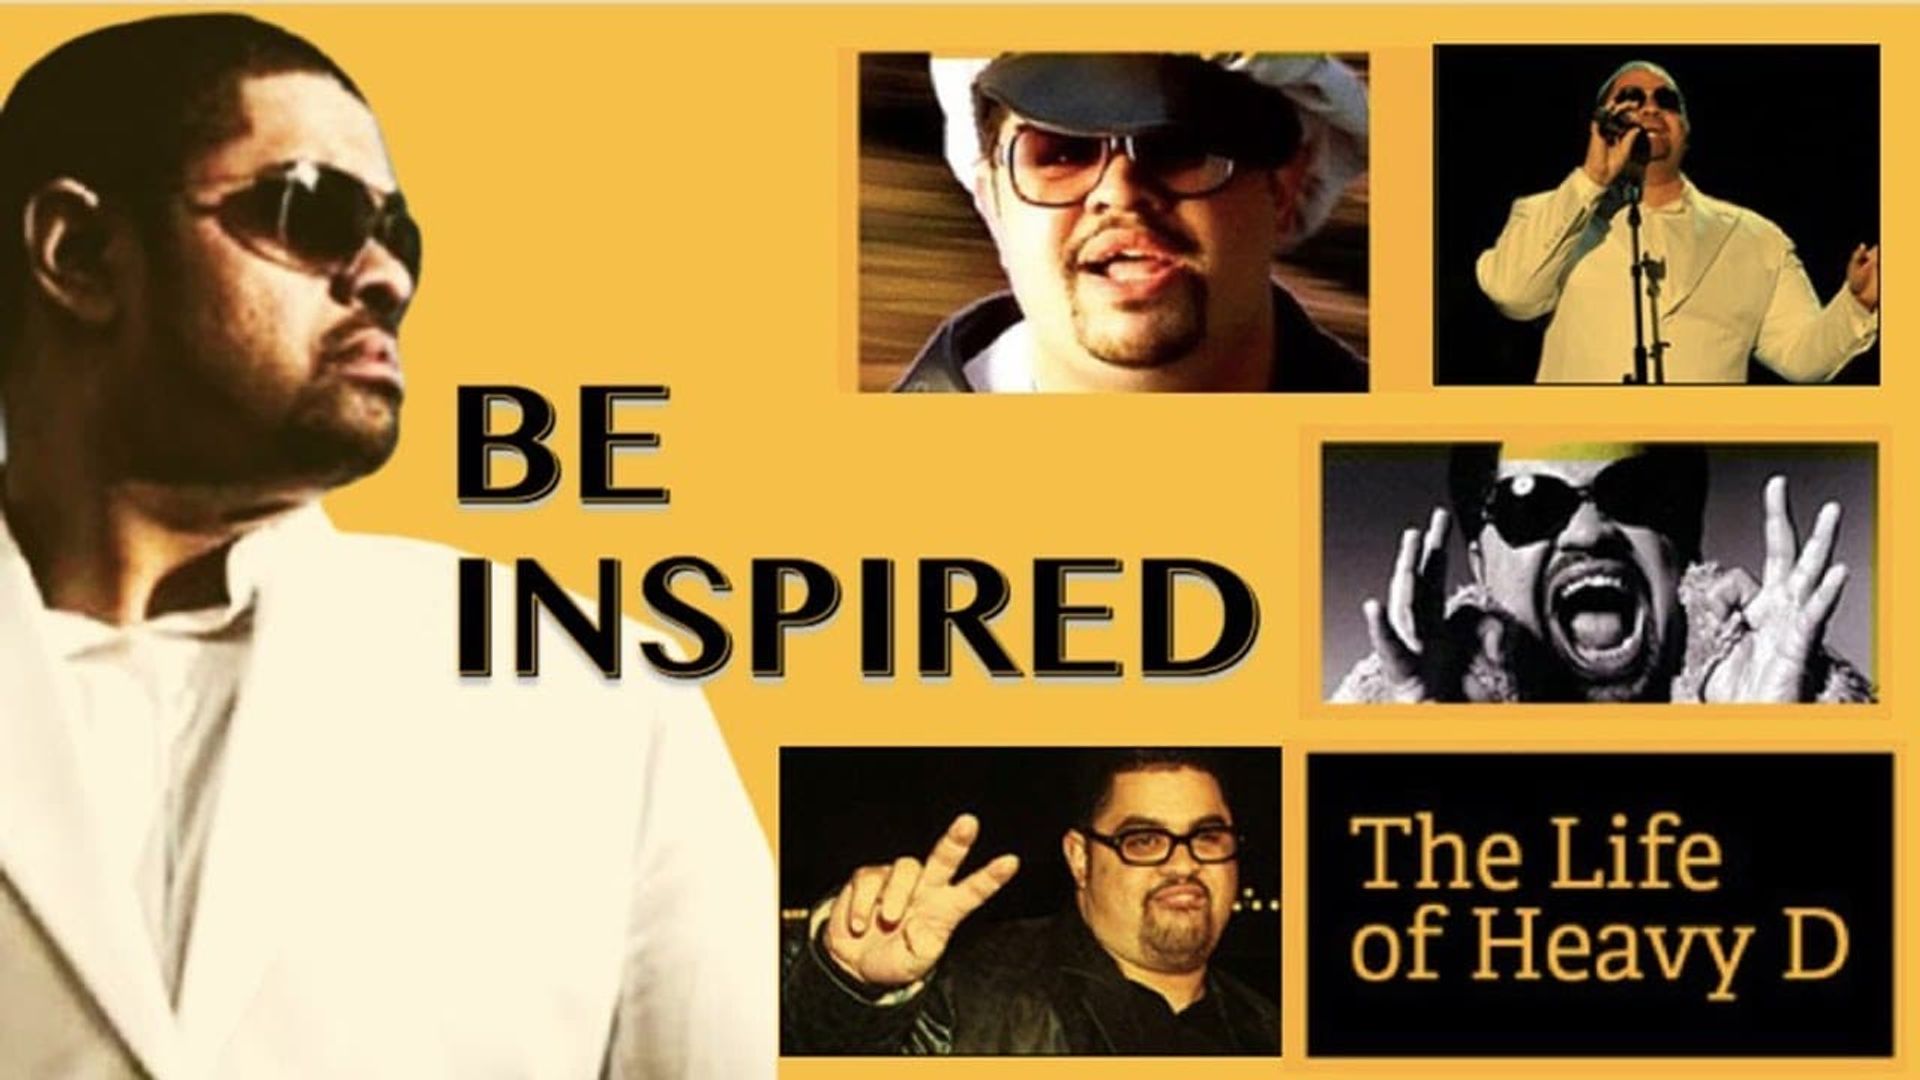 Be Inspired: The Life of Heavy D background